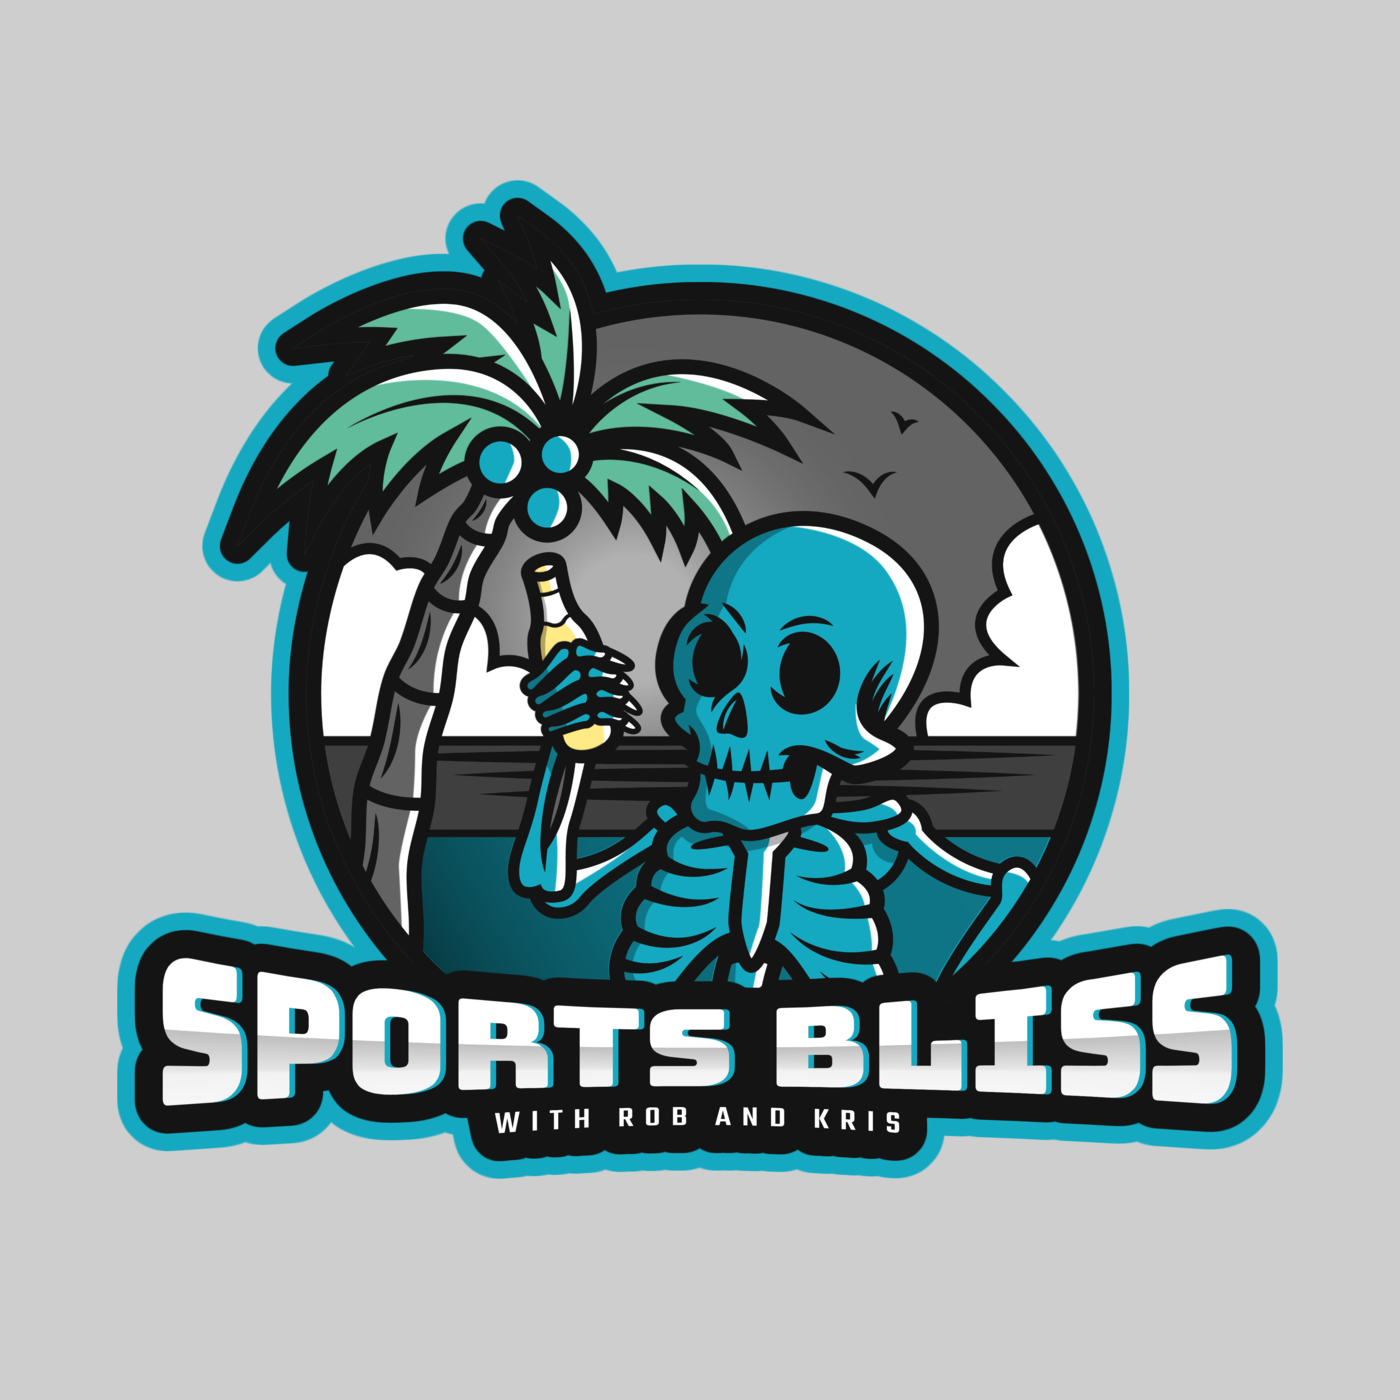 Artwork for podcast Sports Bliss with Rob and Kris